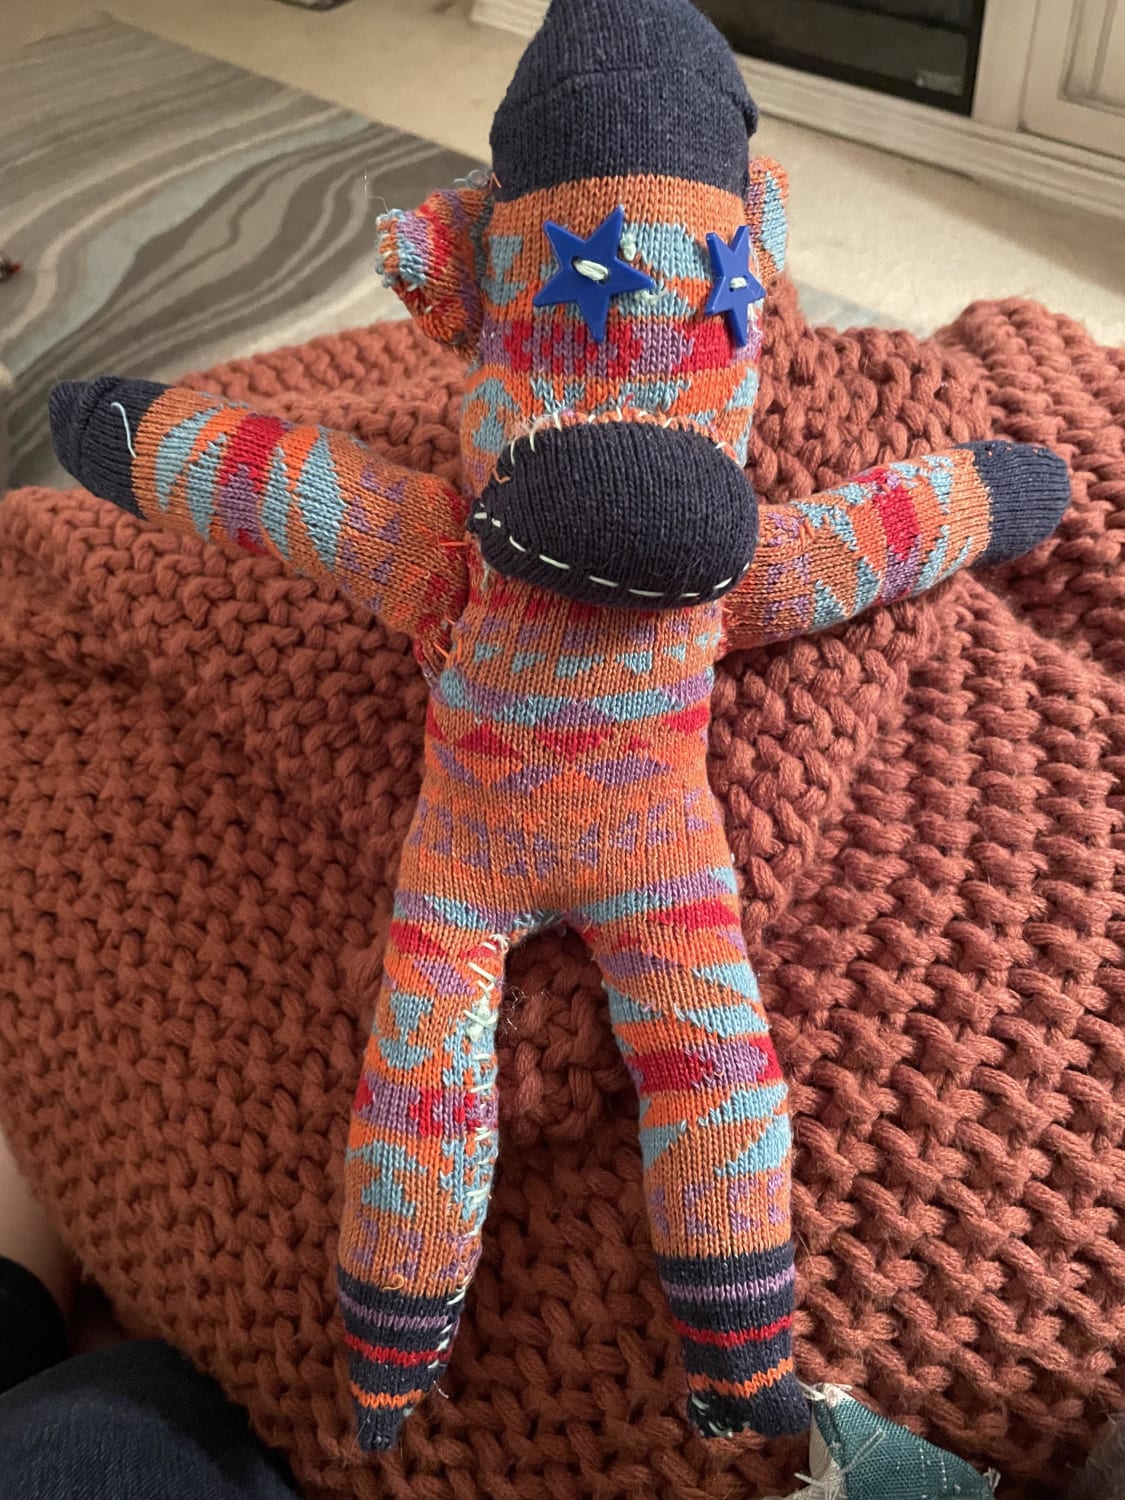 I’m an art therapist… not a fiber artist. But I practiced making a sock monkey per the request of a patient. I just wanted to share it. It’s not great but makes me happy! 🤣